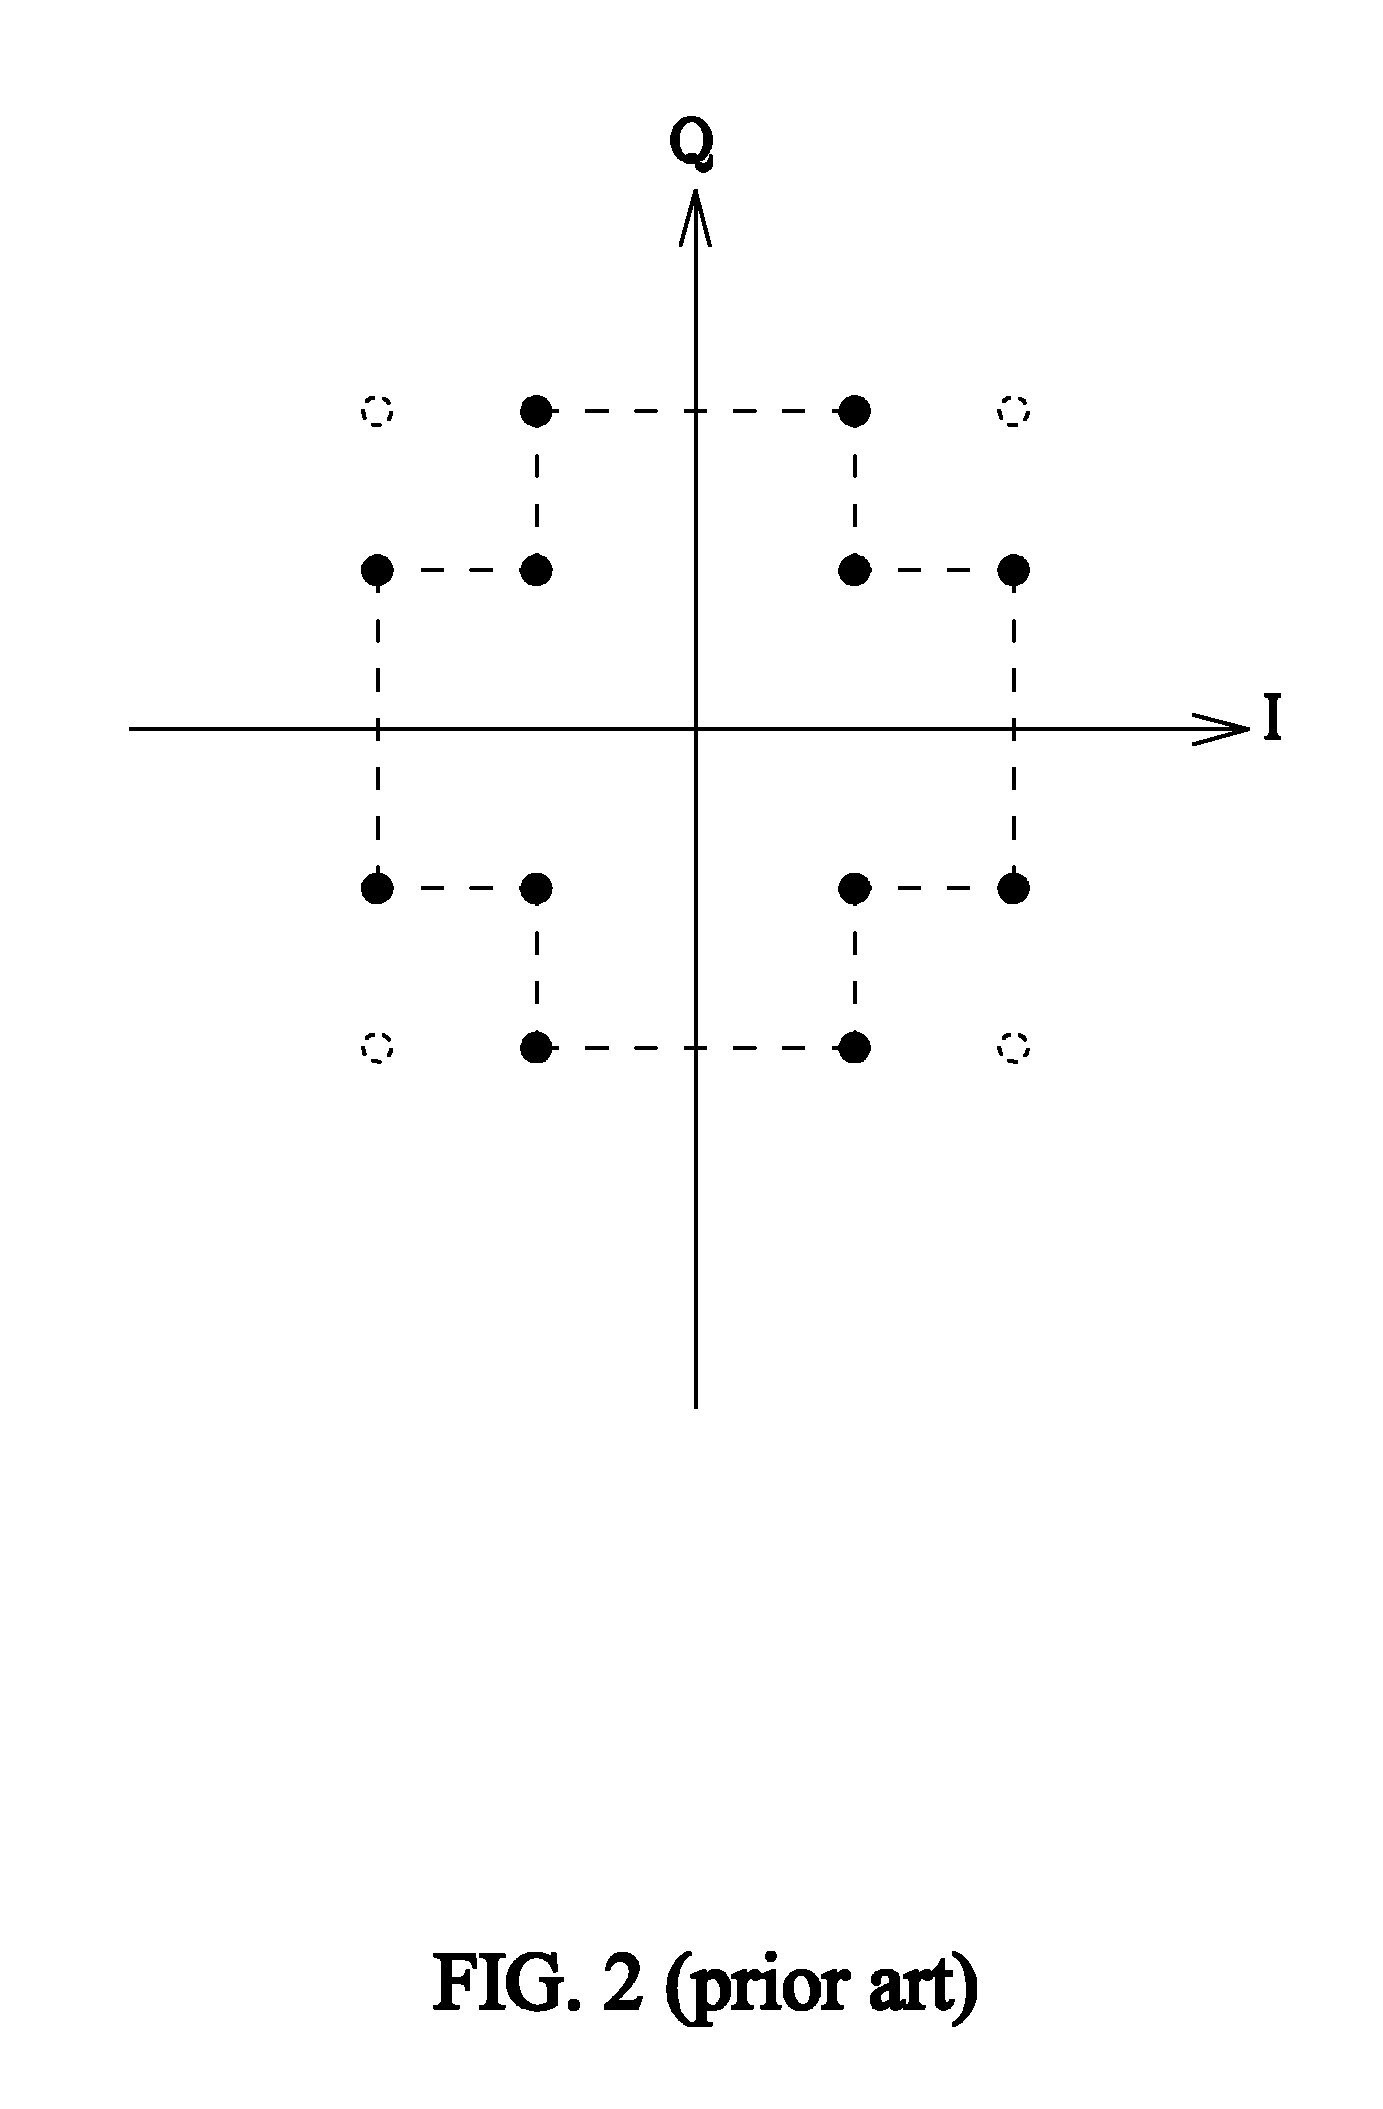 Phase Detecting Module and Detecting Method Thereof